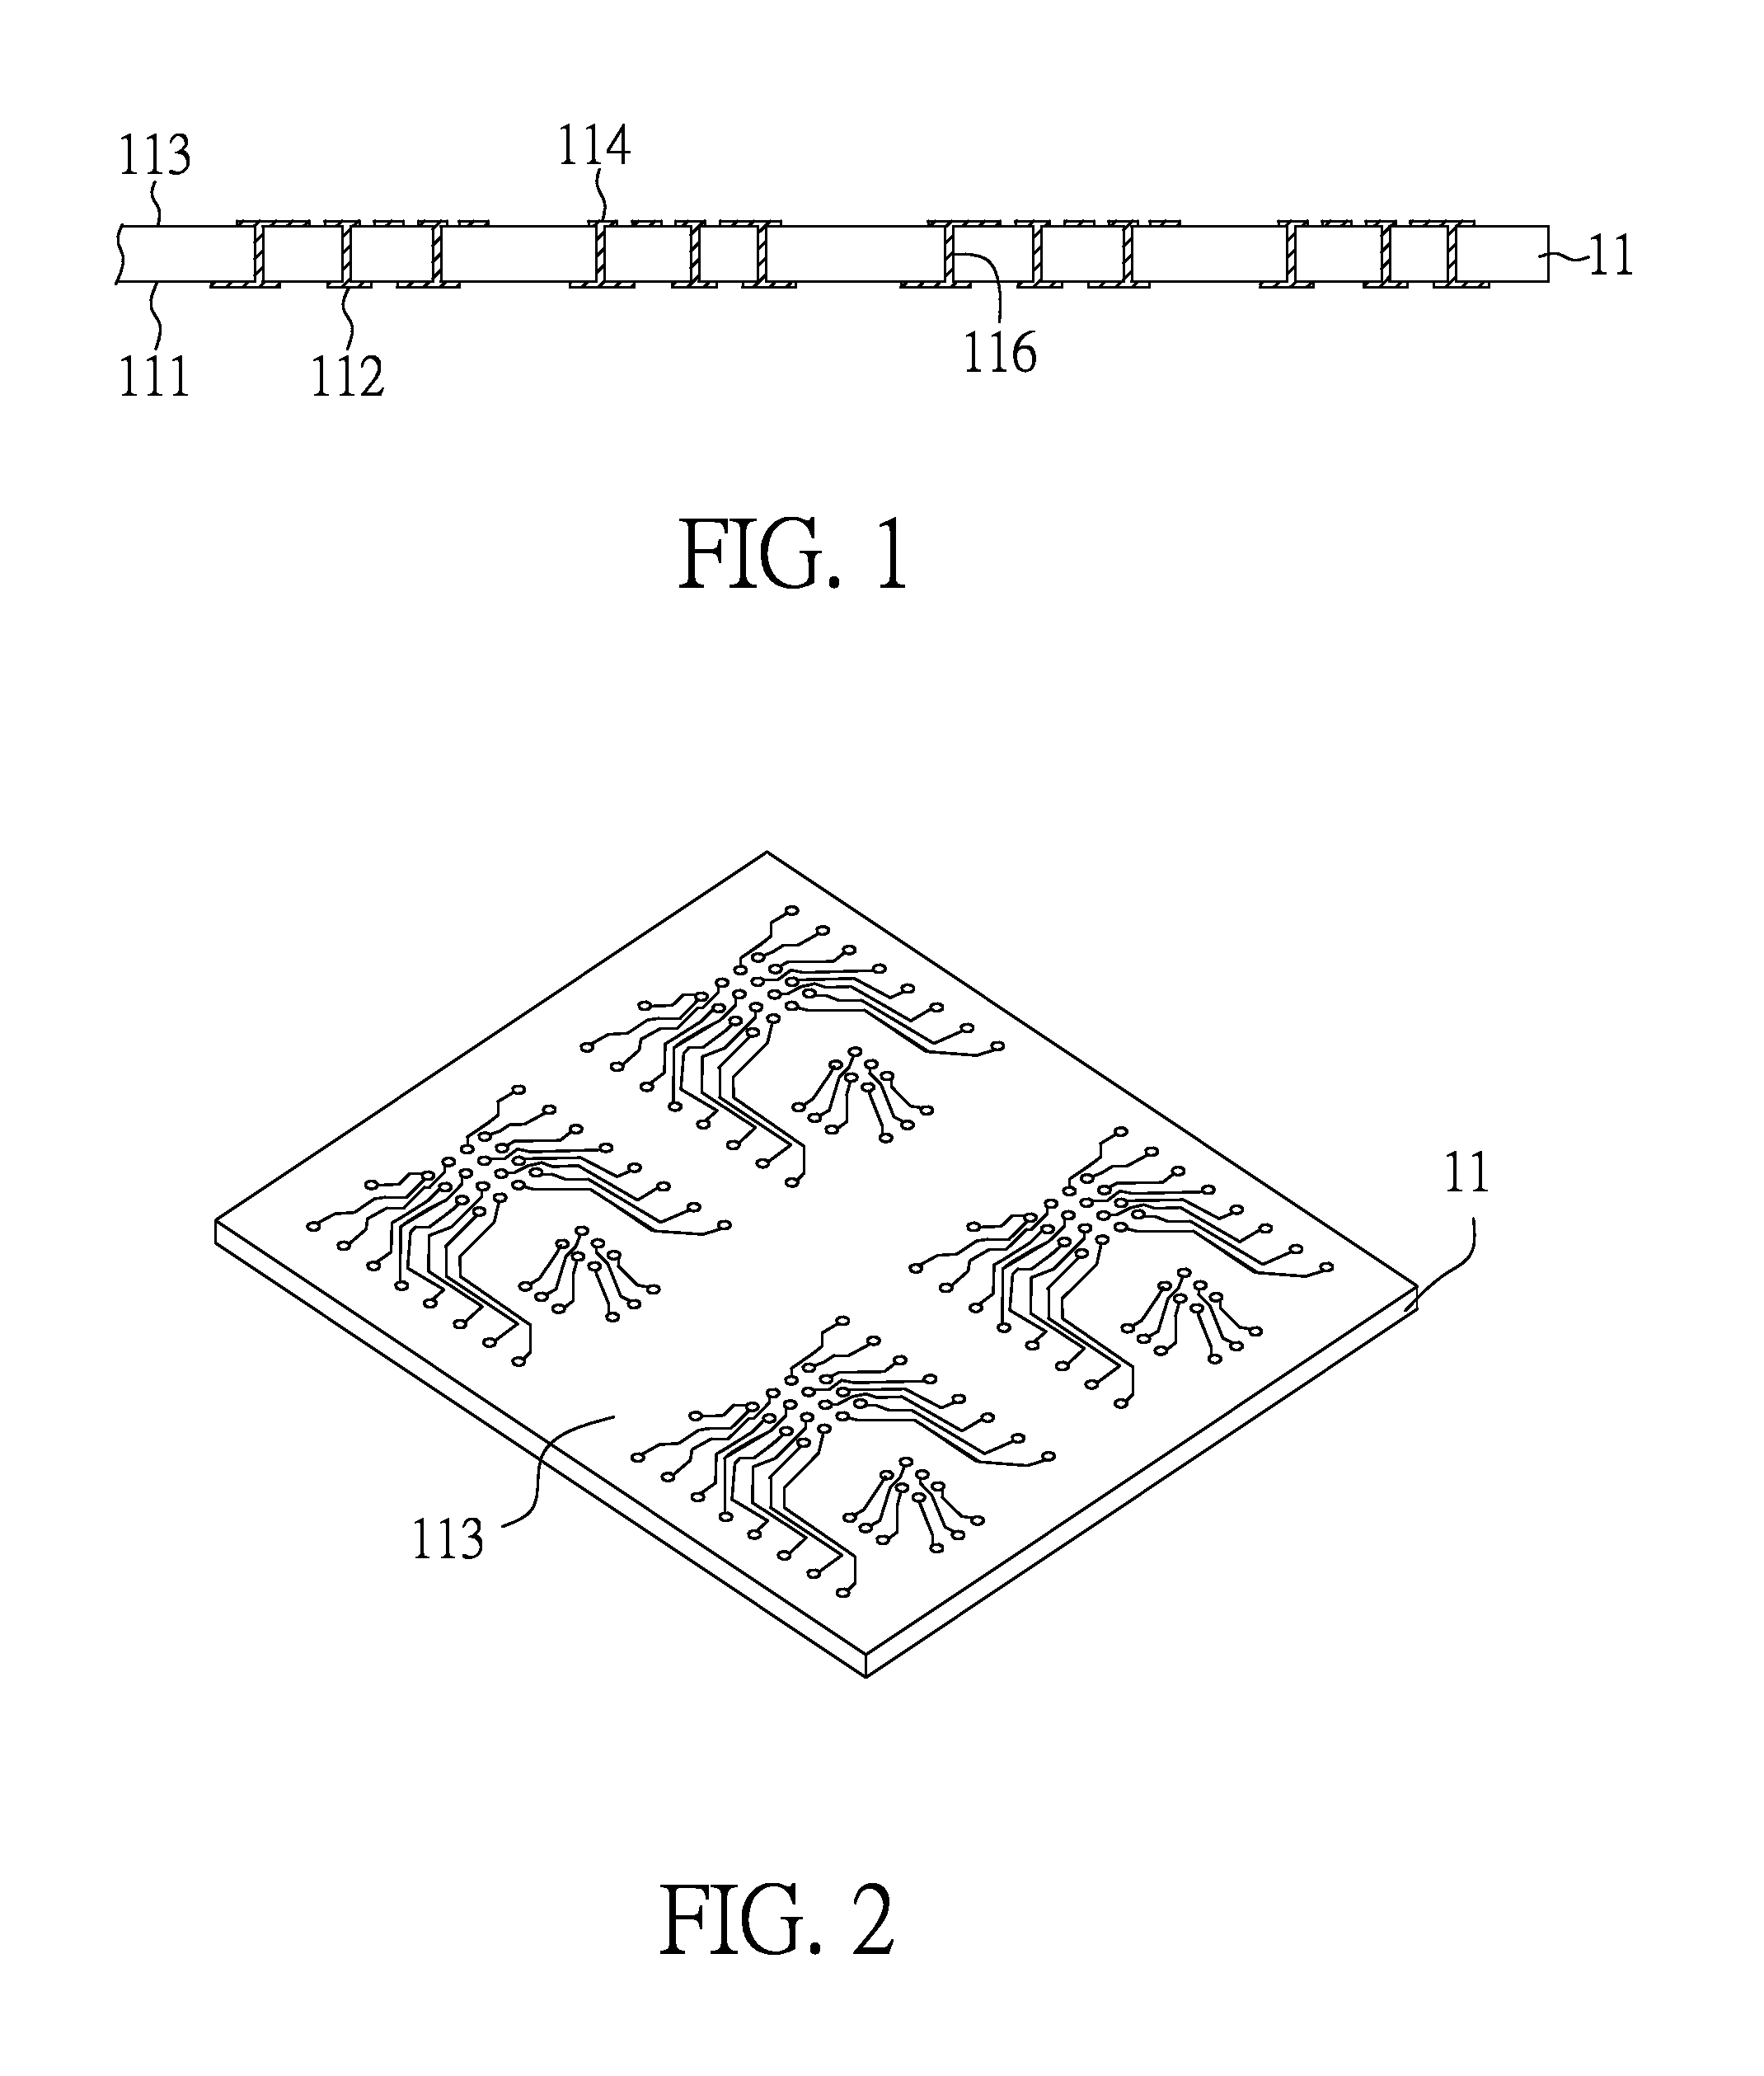 Semiconductor package with package-on-package stacking capability and method of manufacturing the same